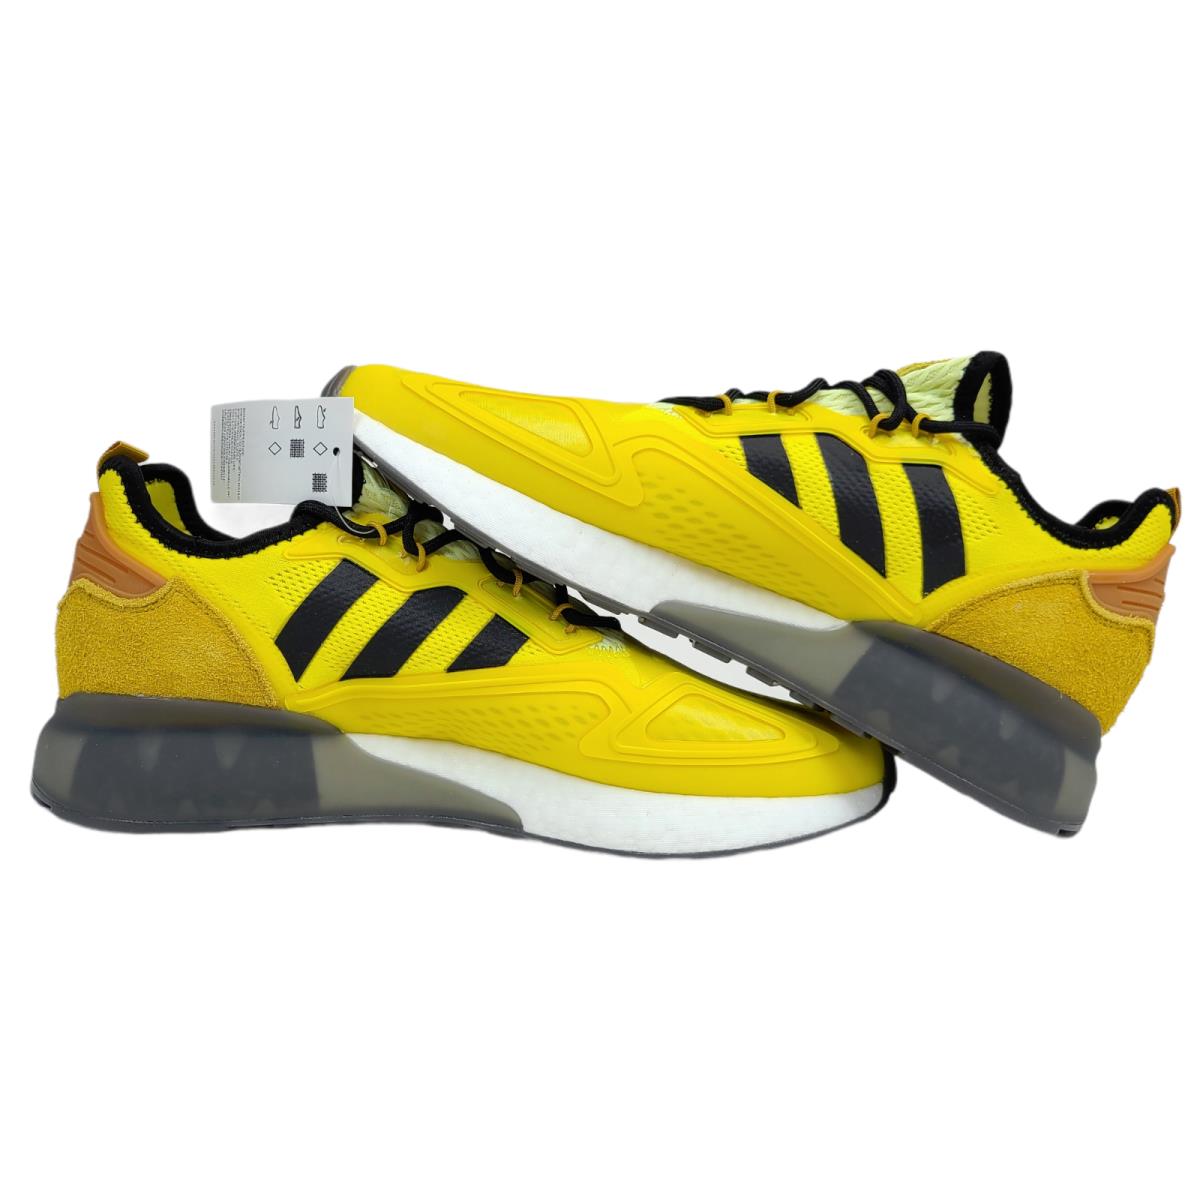 Adidas shoes Boost - Yellow 5